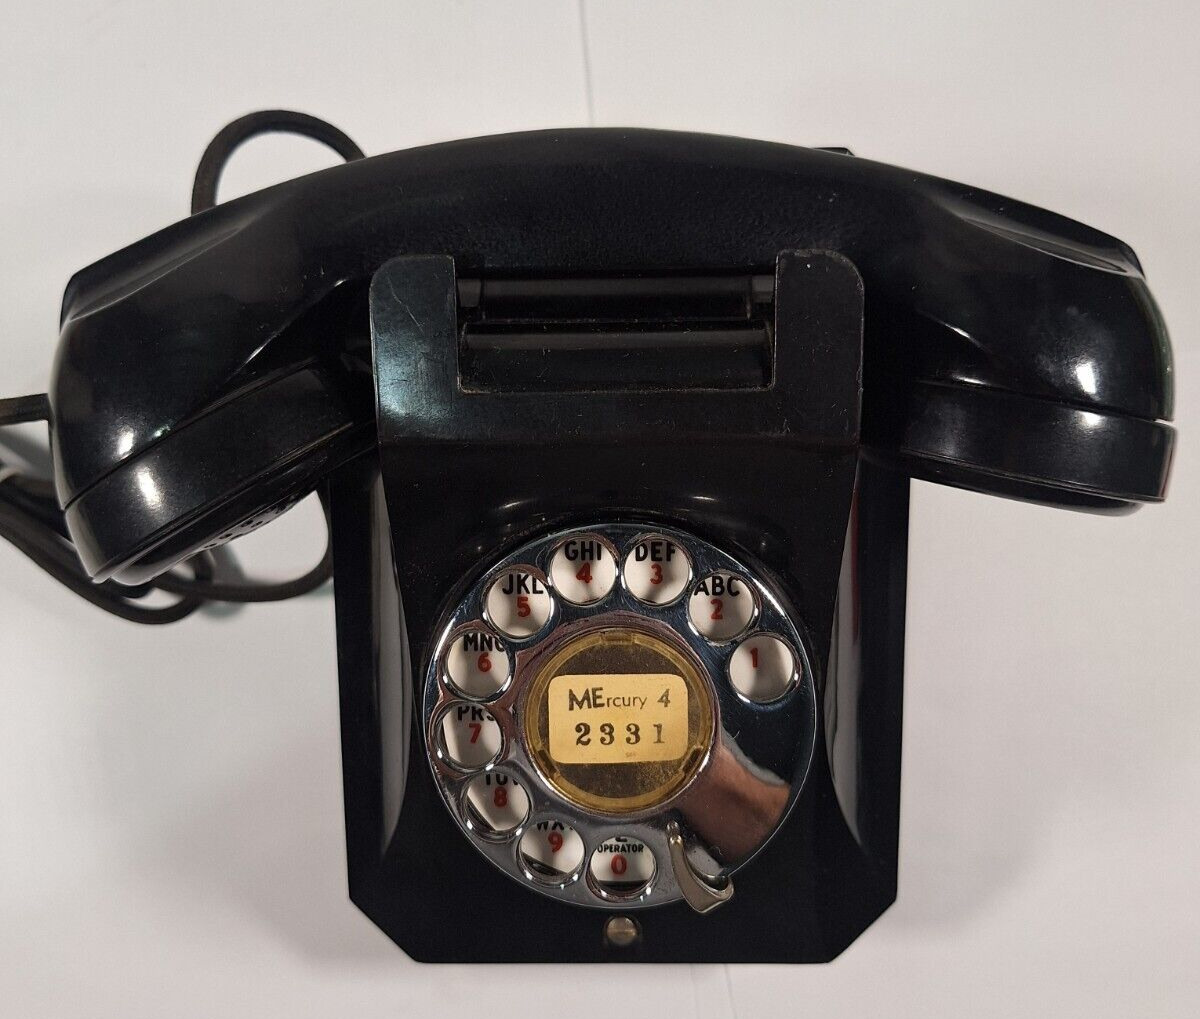 Vintage Stromberg Carlson 1250 Telephone Black Wall Mounted With Dial